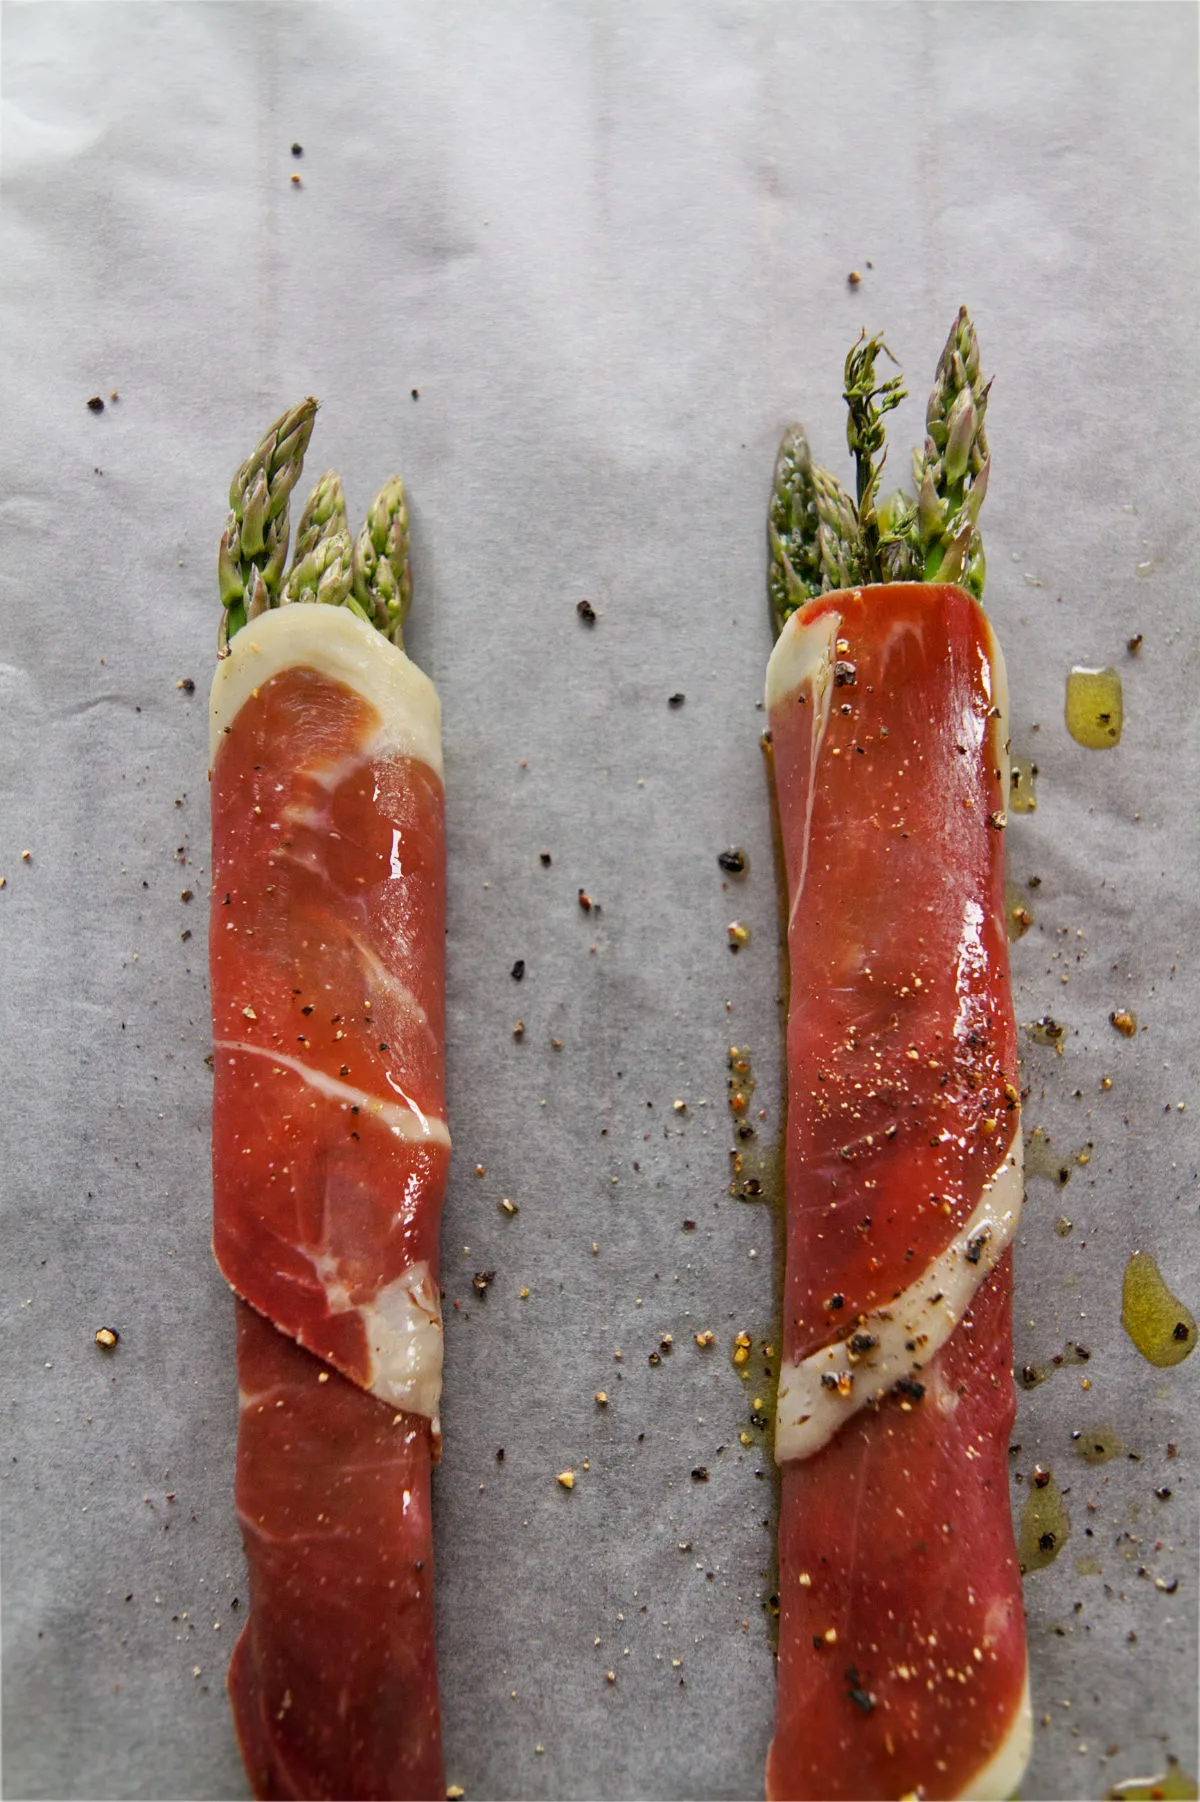 Asparagus spears wrapped in Serrano ham.